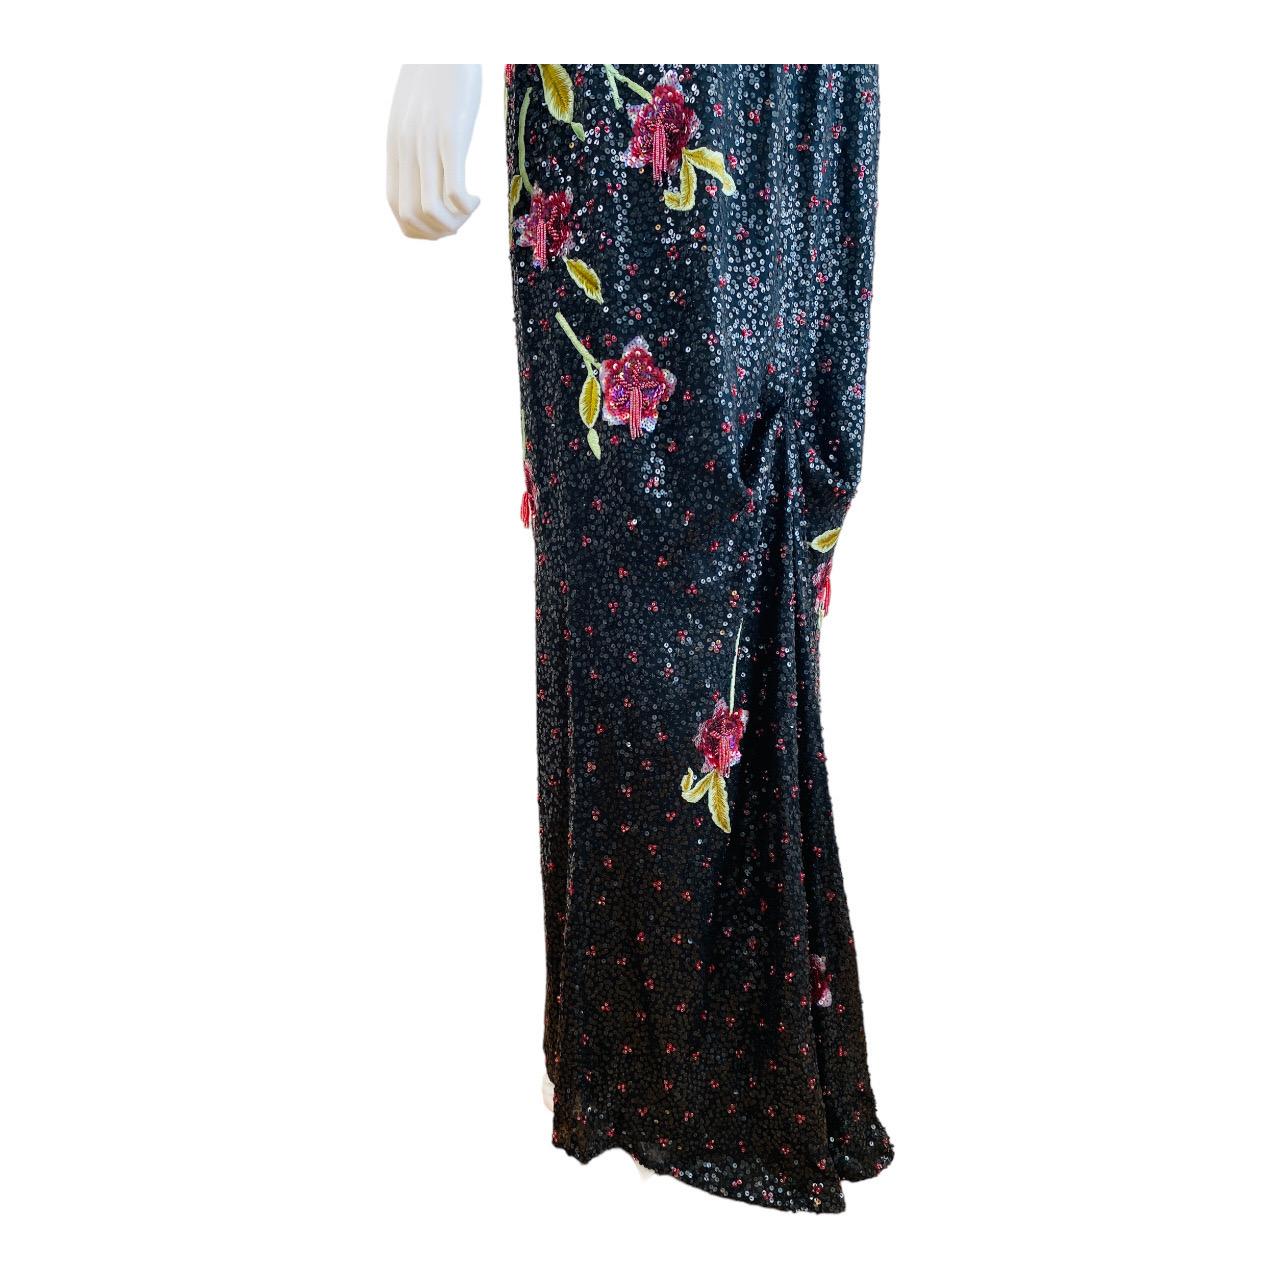 Vintage 2002 Escada Hand Beaded Sequin Floral Maxi Dress Gown Black Pink Flowers For Sale 3